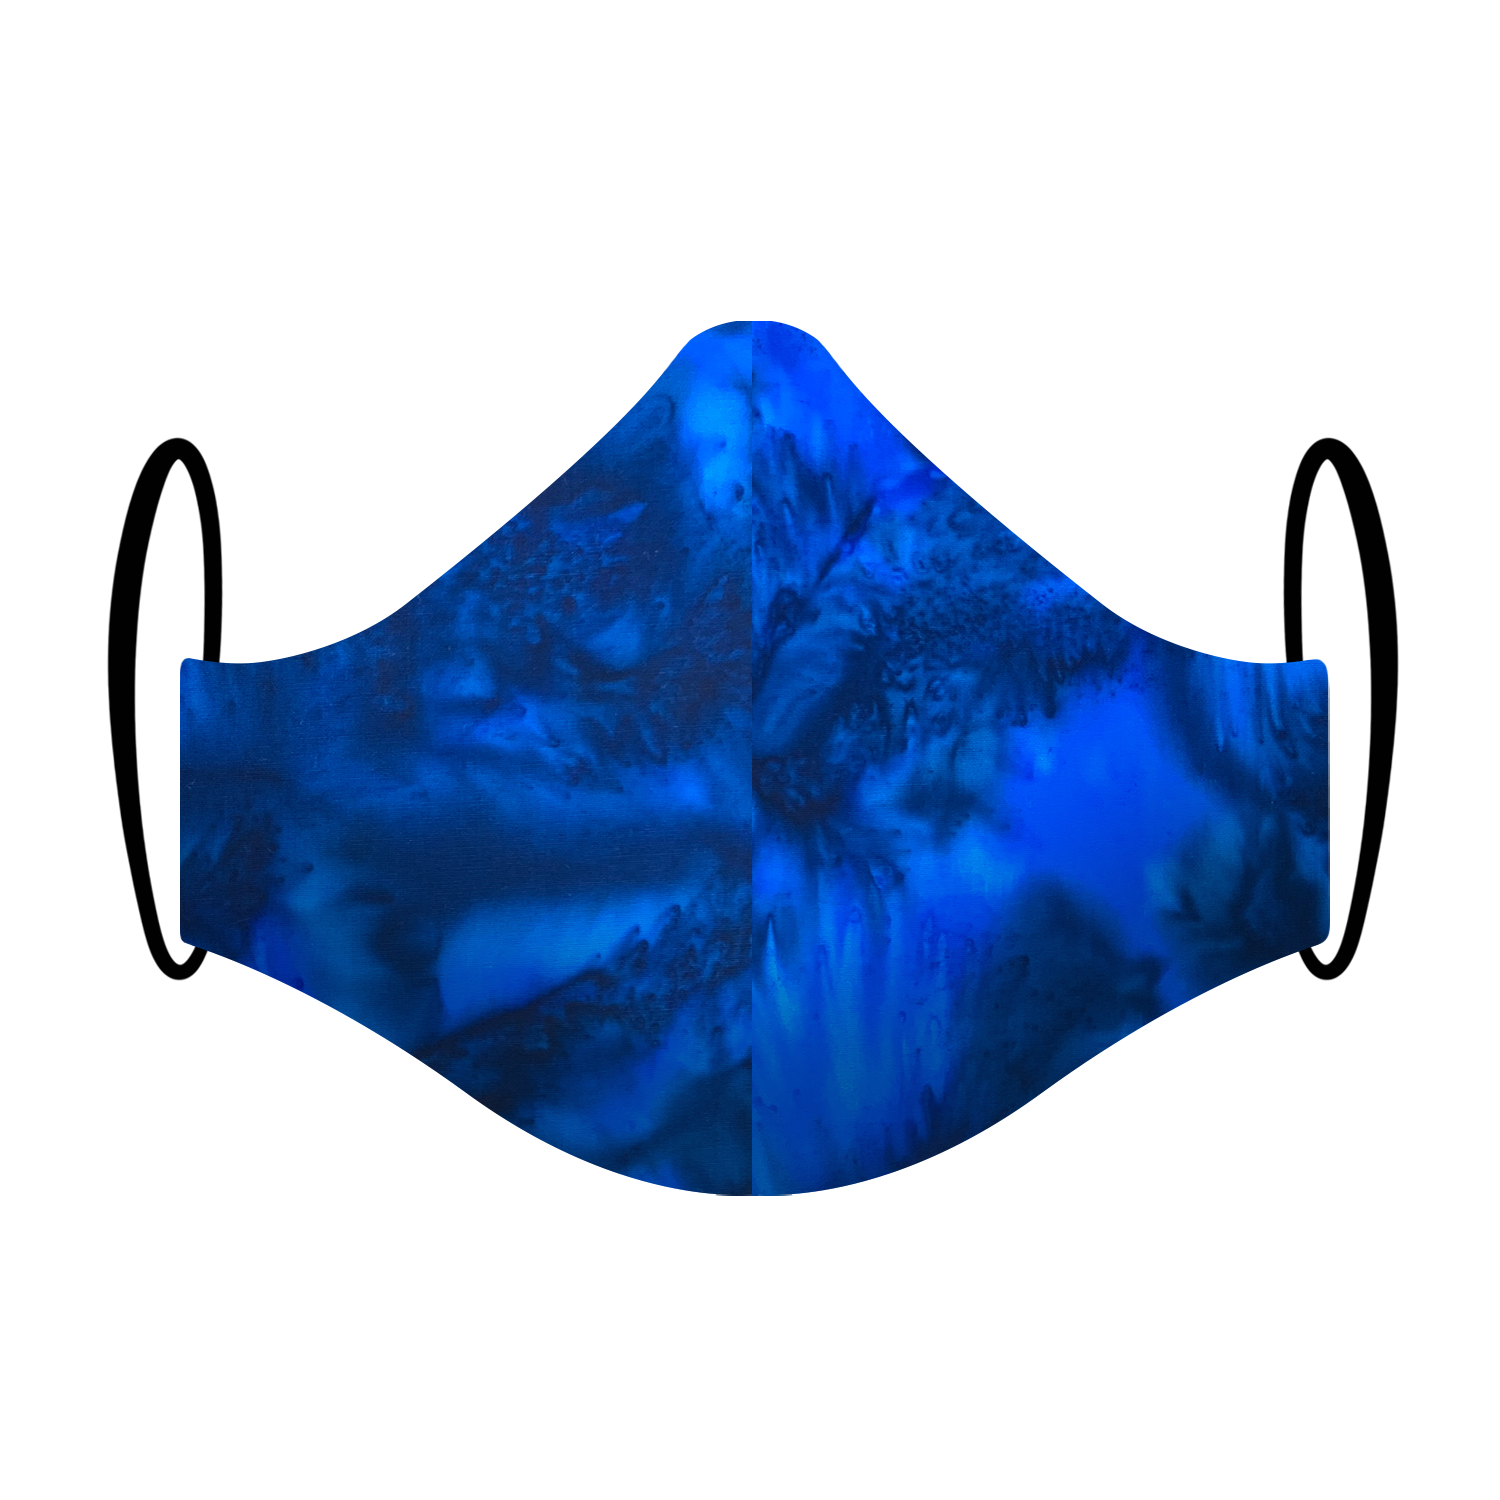 Triple layered face mask made in Melbourne Australia from cotton and poplin featuring a unique tie-dyed blue ocean print